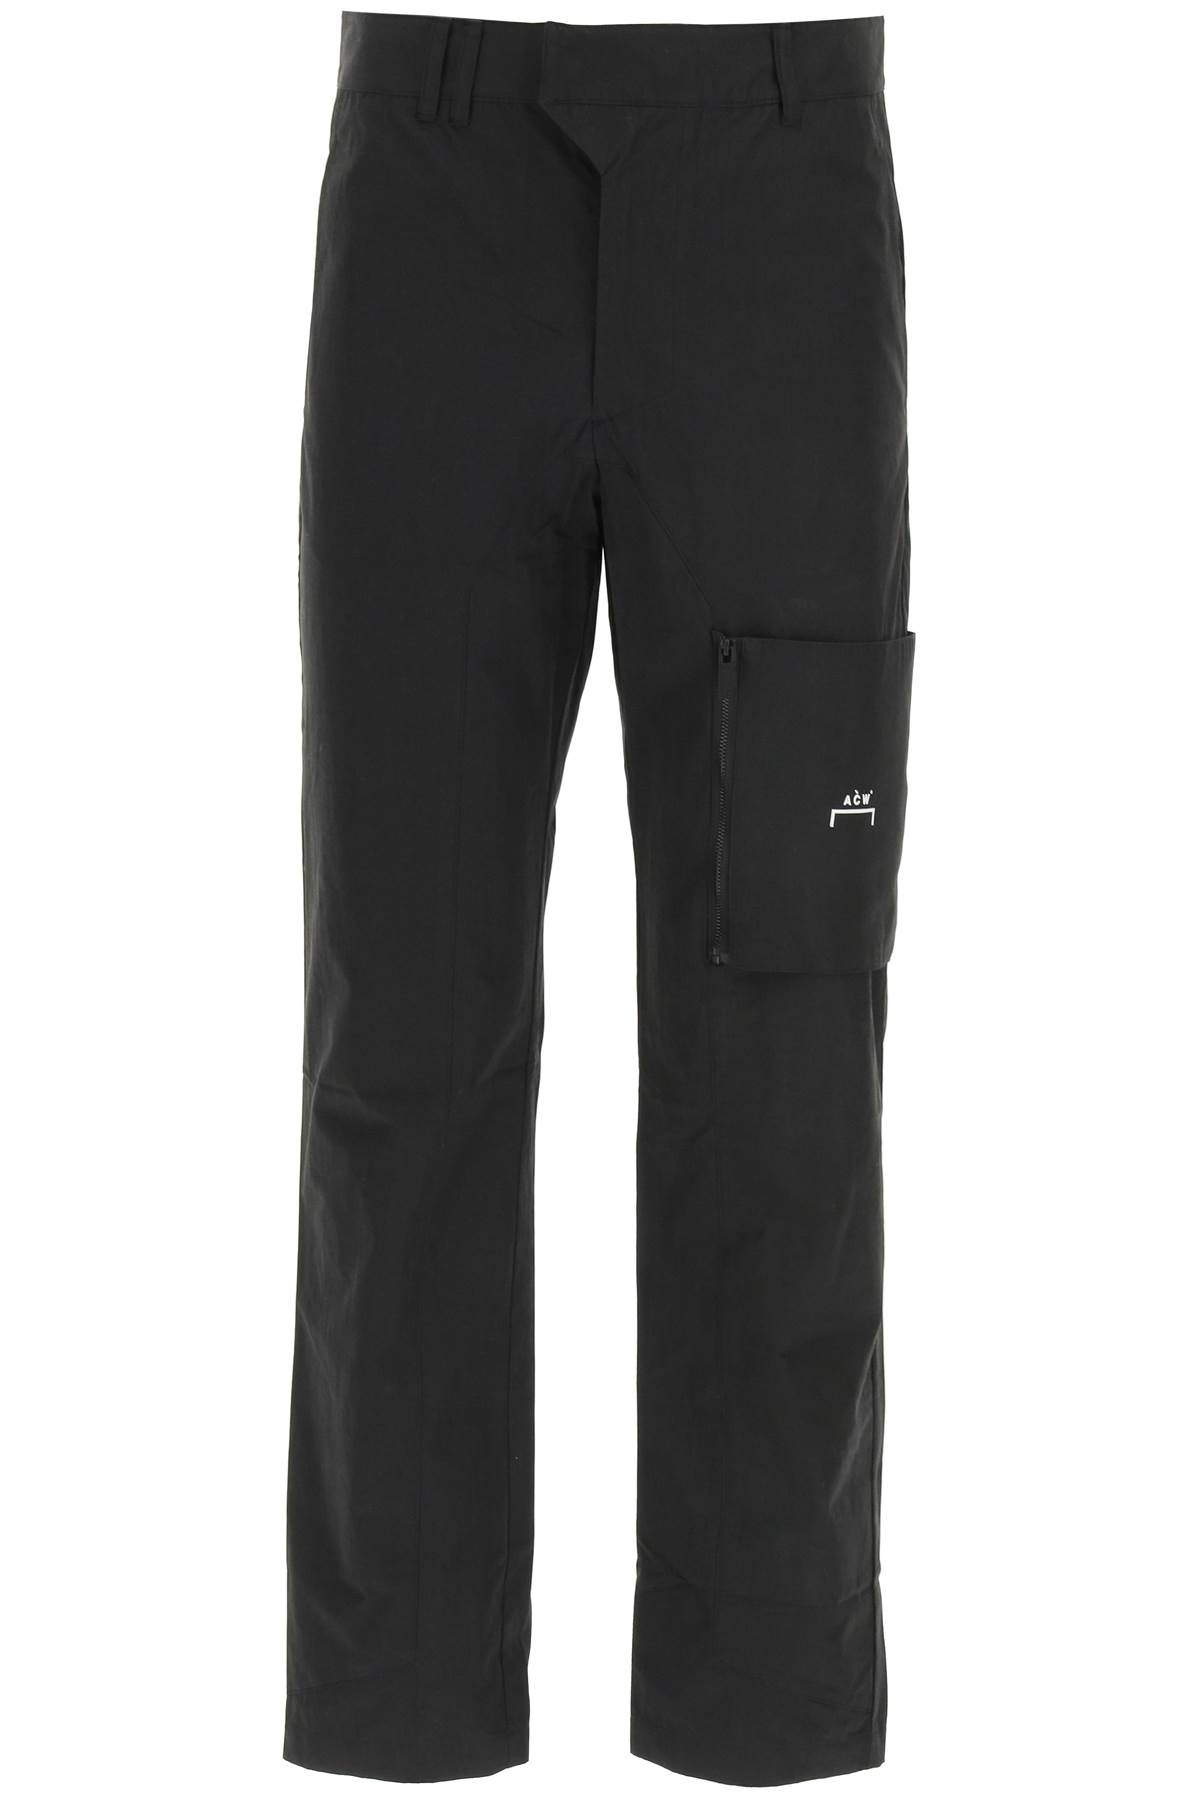 A-COLD-WALL Circuit Cargo Trousers